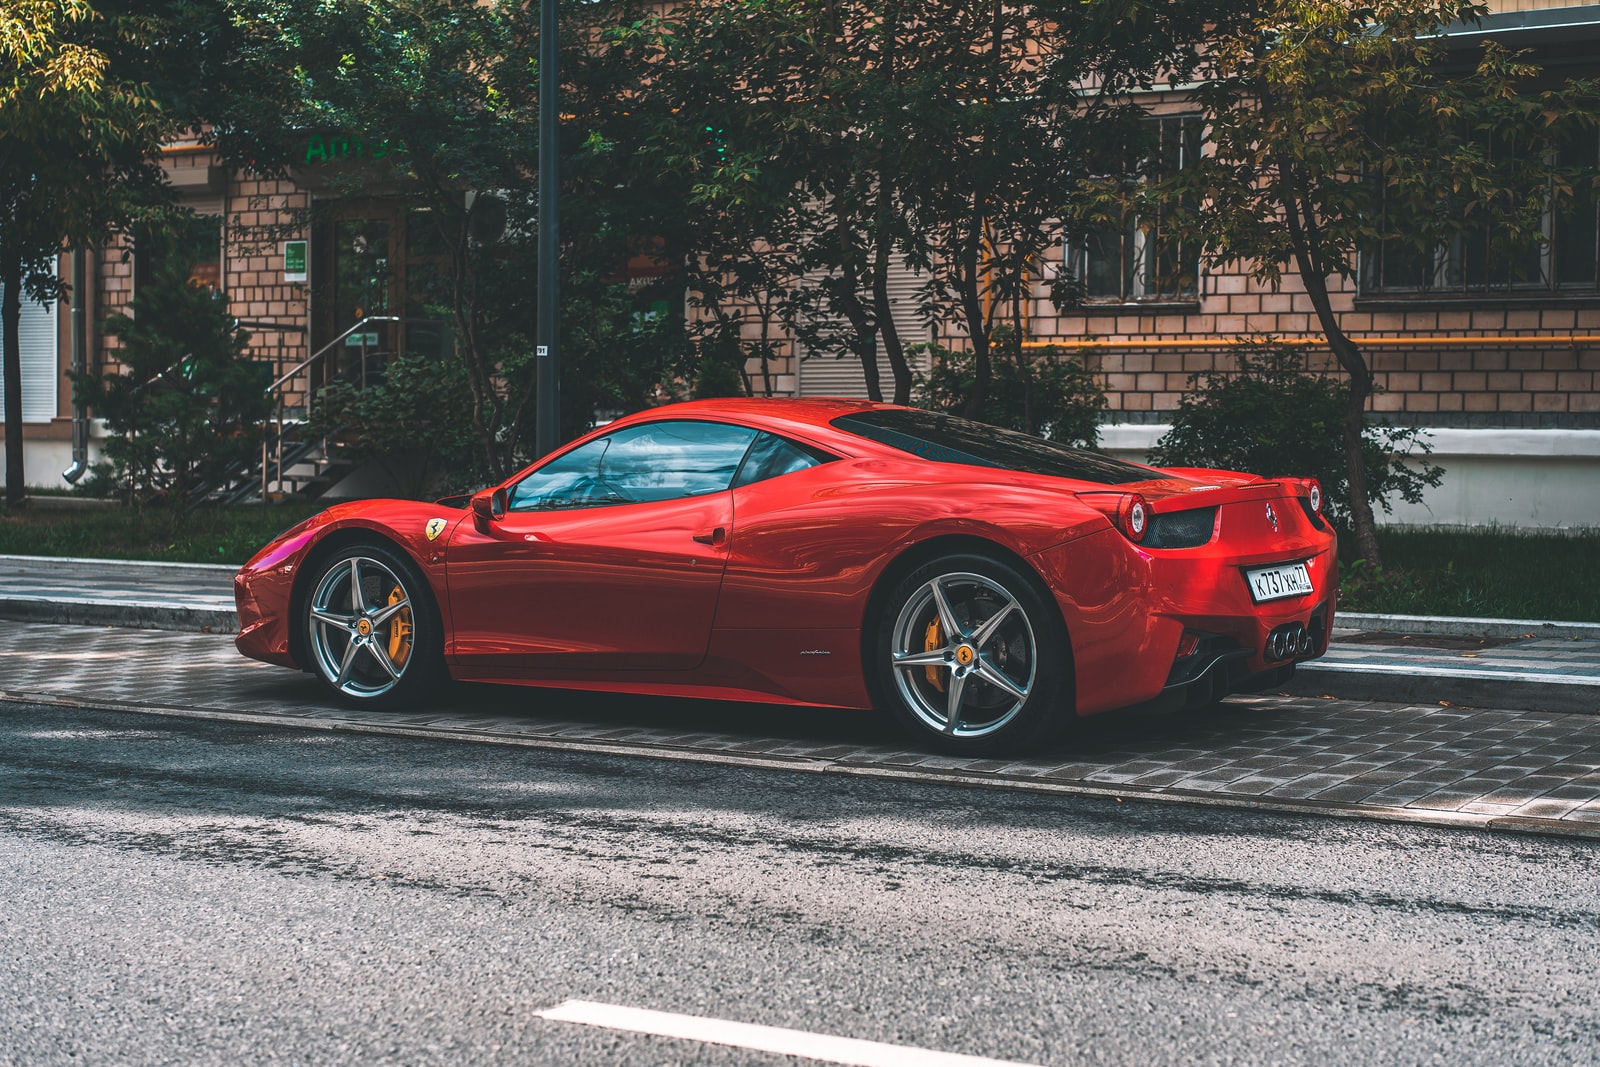 red ferrari 458 italia parked on road side during daytime